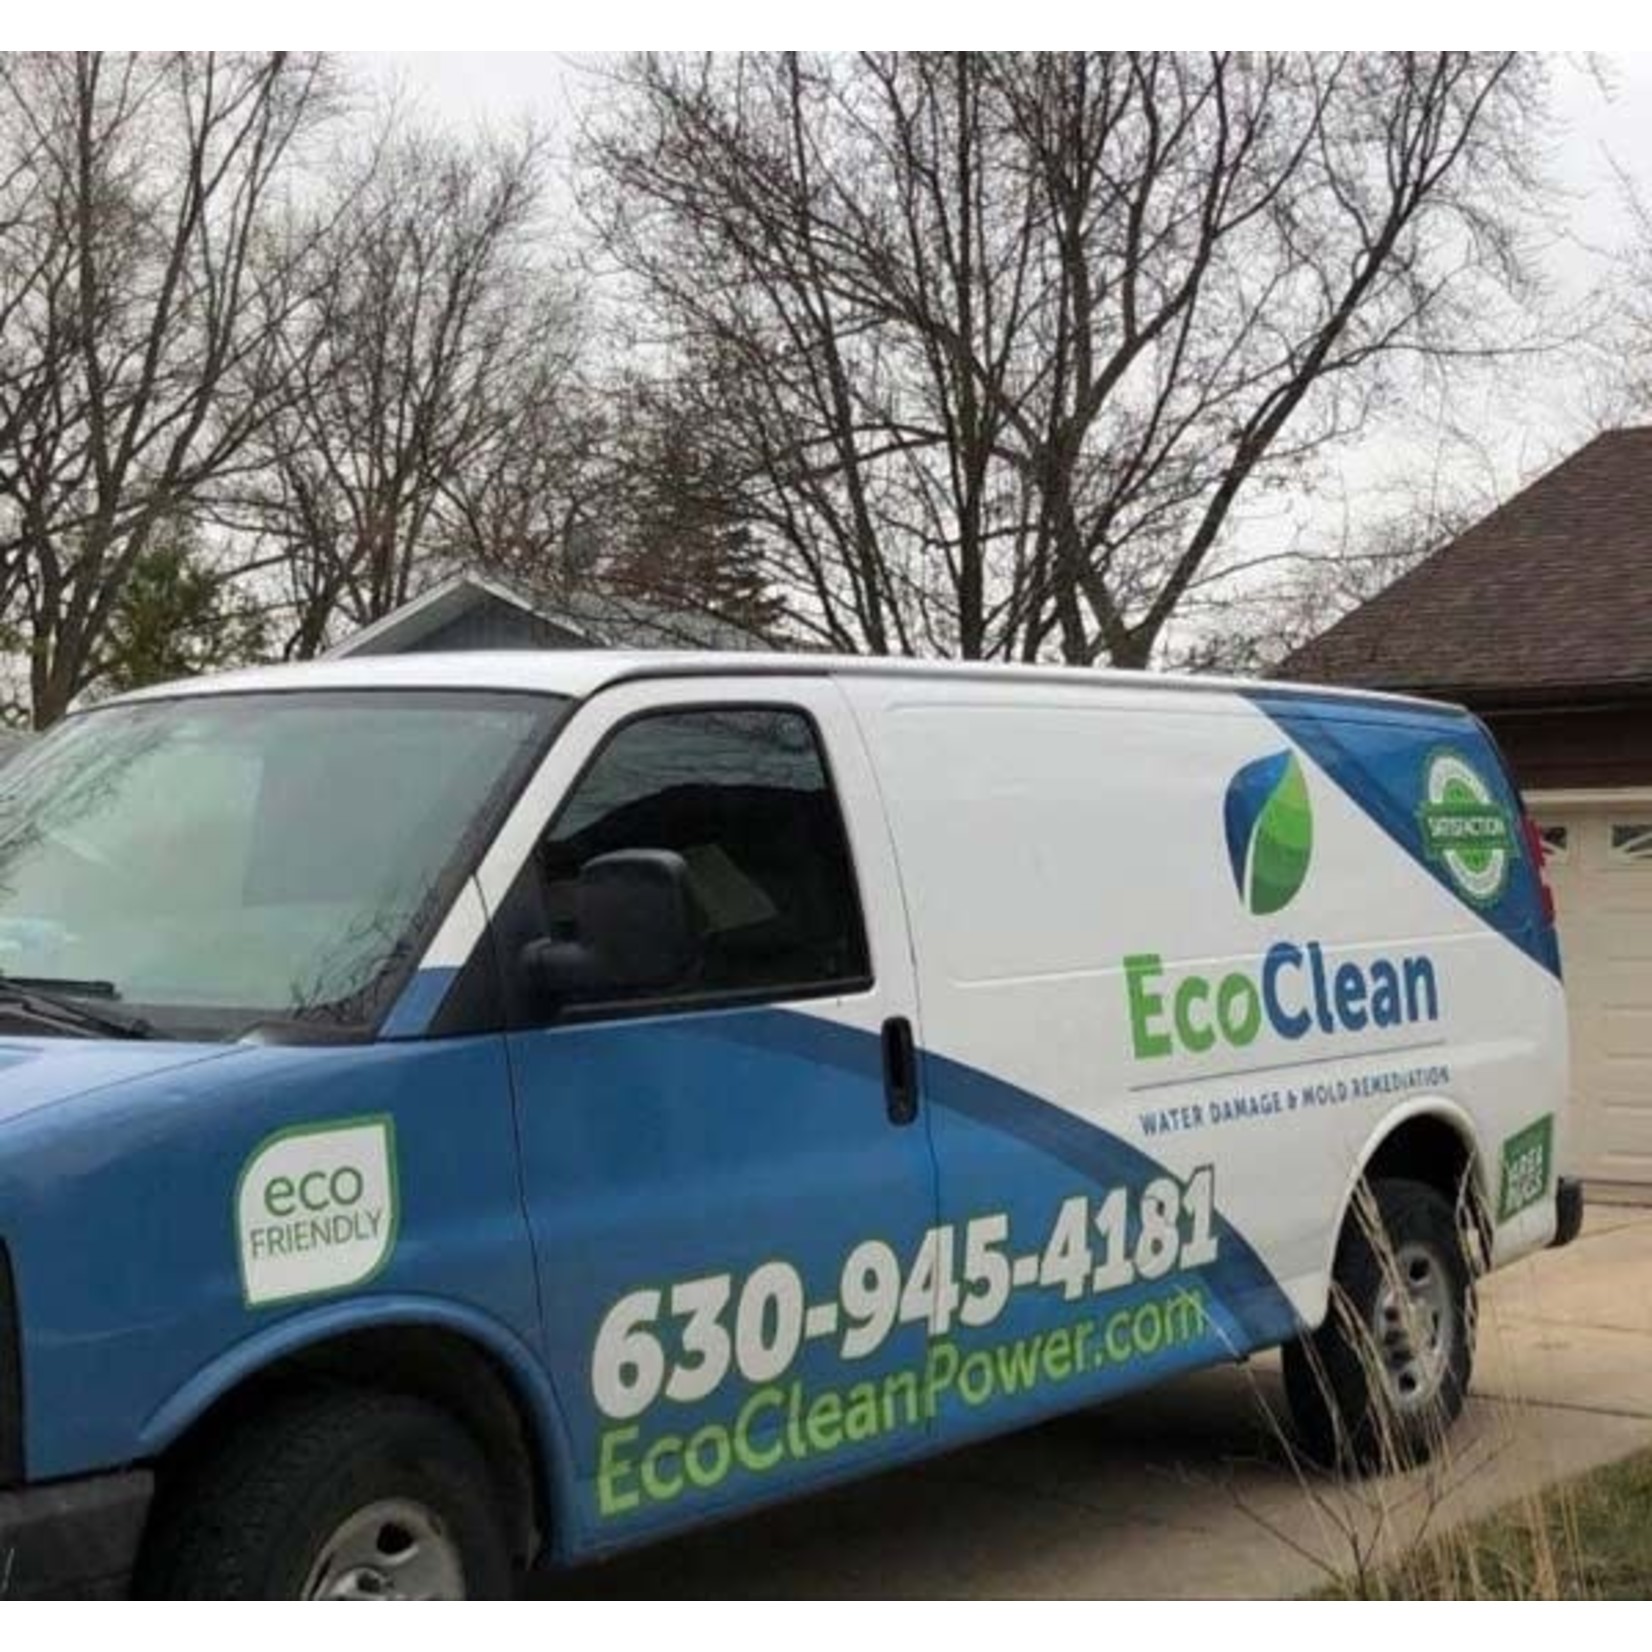 EcoClean Water Restoration & Carpet Cleaning-Nprvl EcoClean Water Restoration & Carpet Cleaning-Nprvl $200.00 Carpet Cleaning Certificate